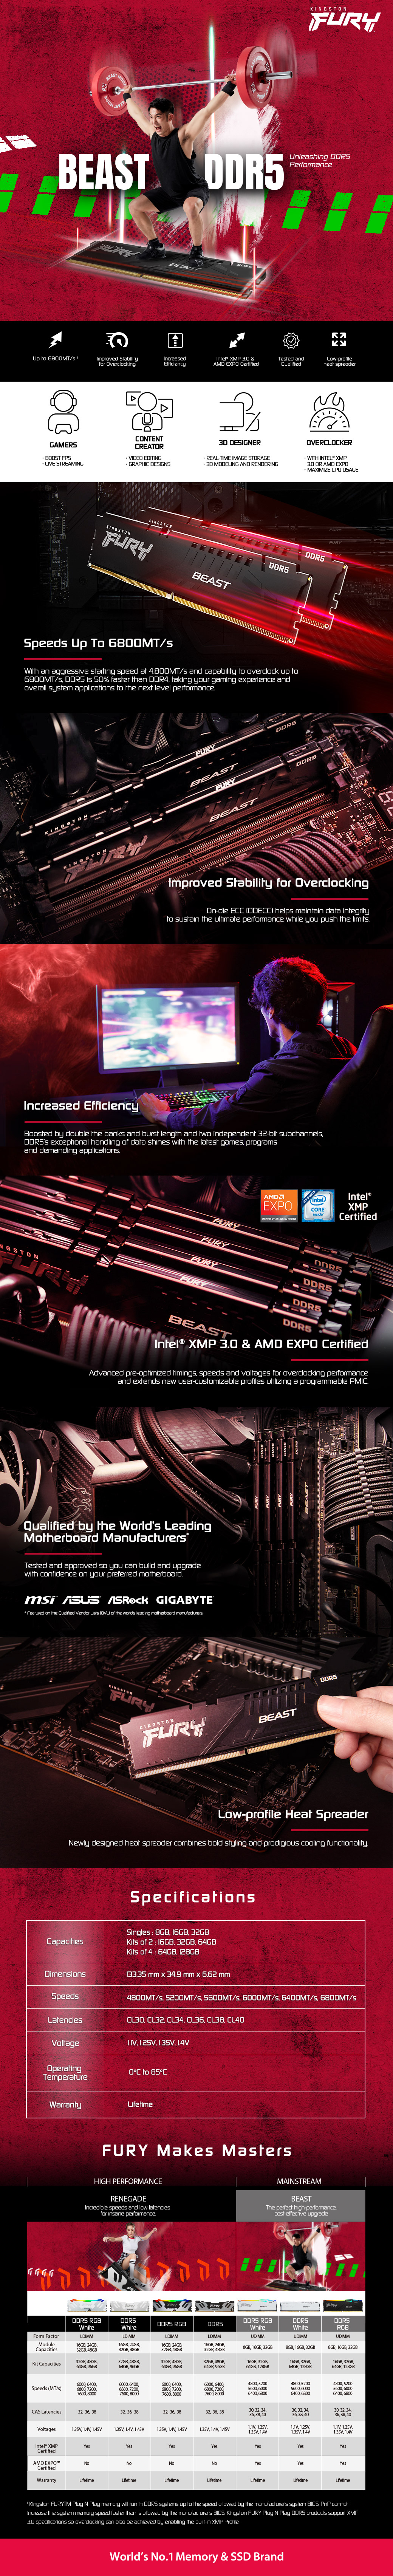 A large marketing image providing additional information about the product Kingston 32GB Kit (2x16GB) DDR5 Fury Beast EXPO/XMP CL32 6400MHz - Additional alt info not provided